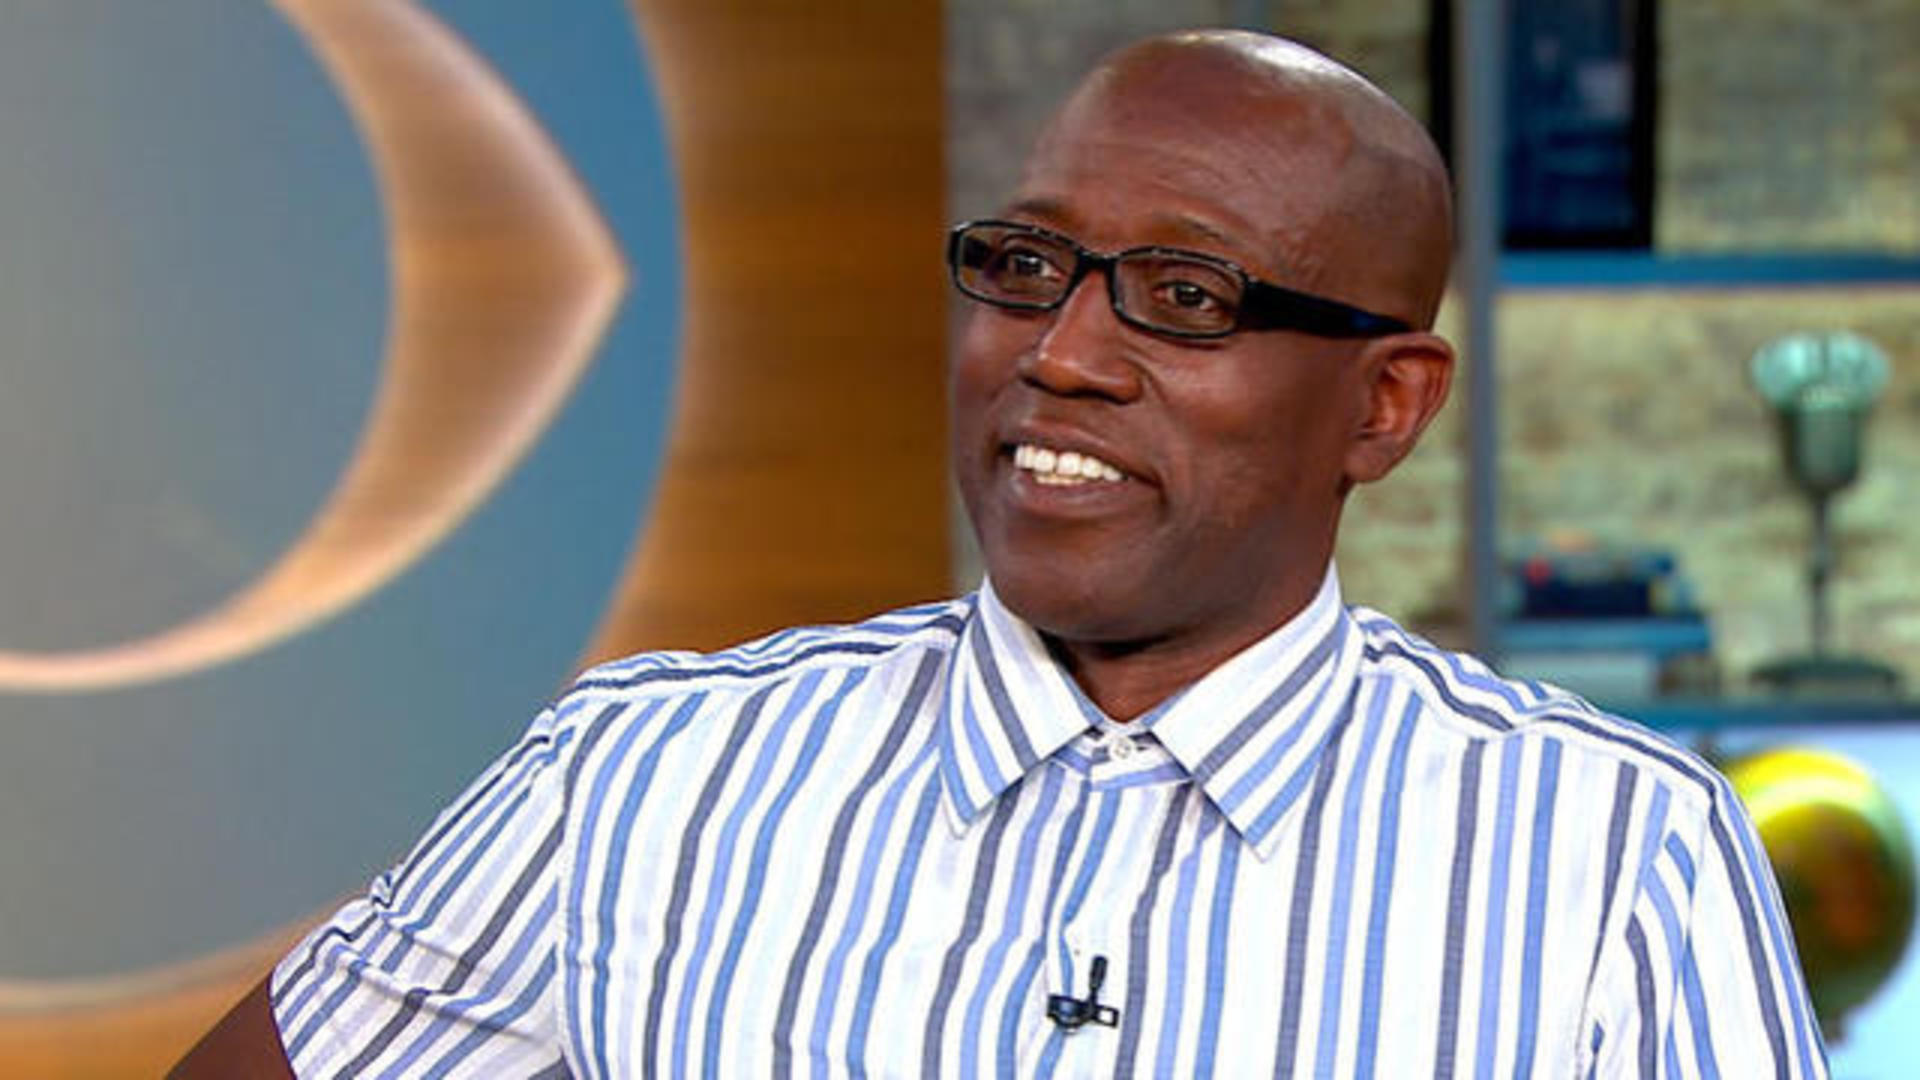 wesley snipes weight loss